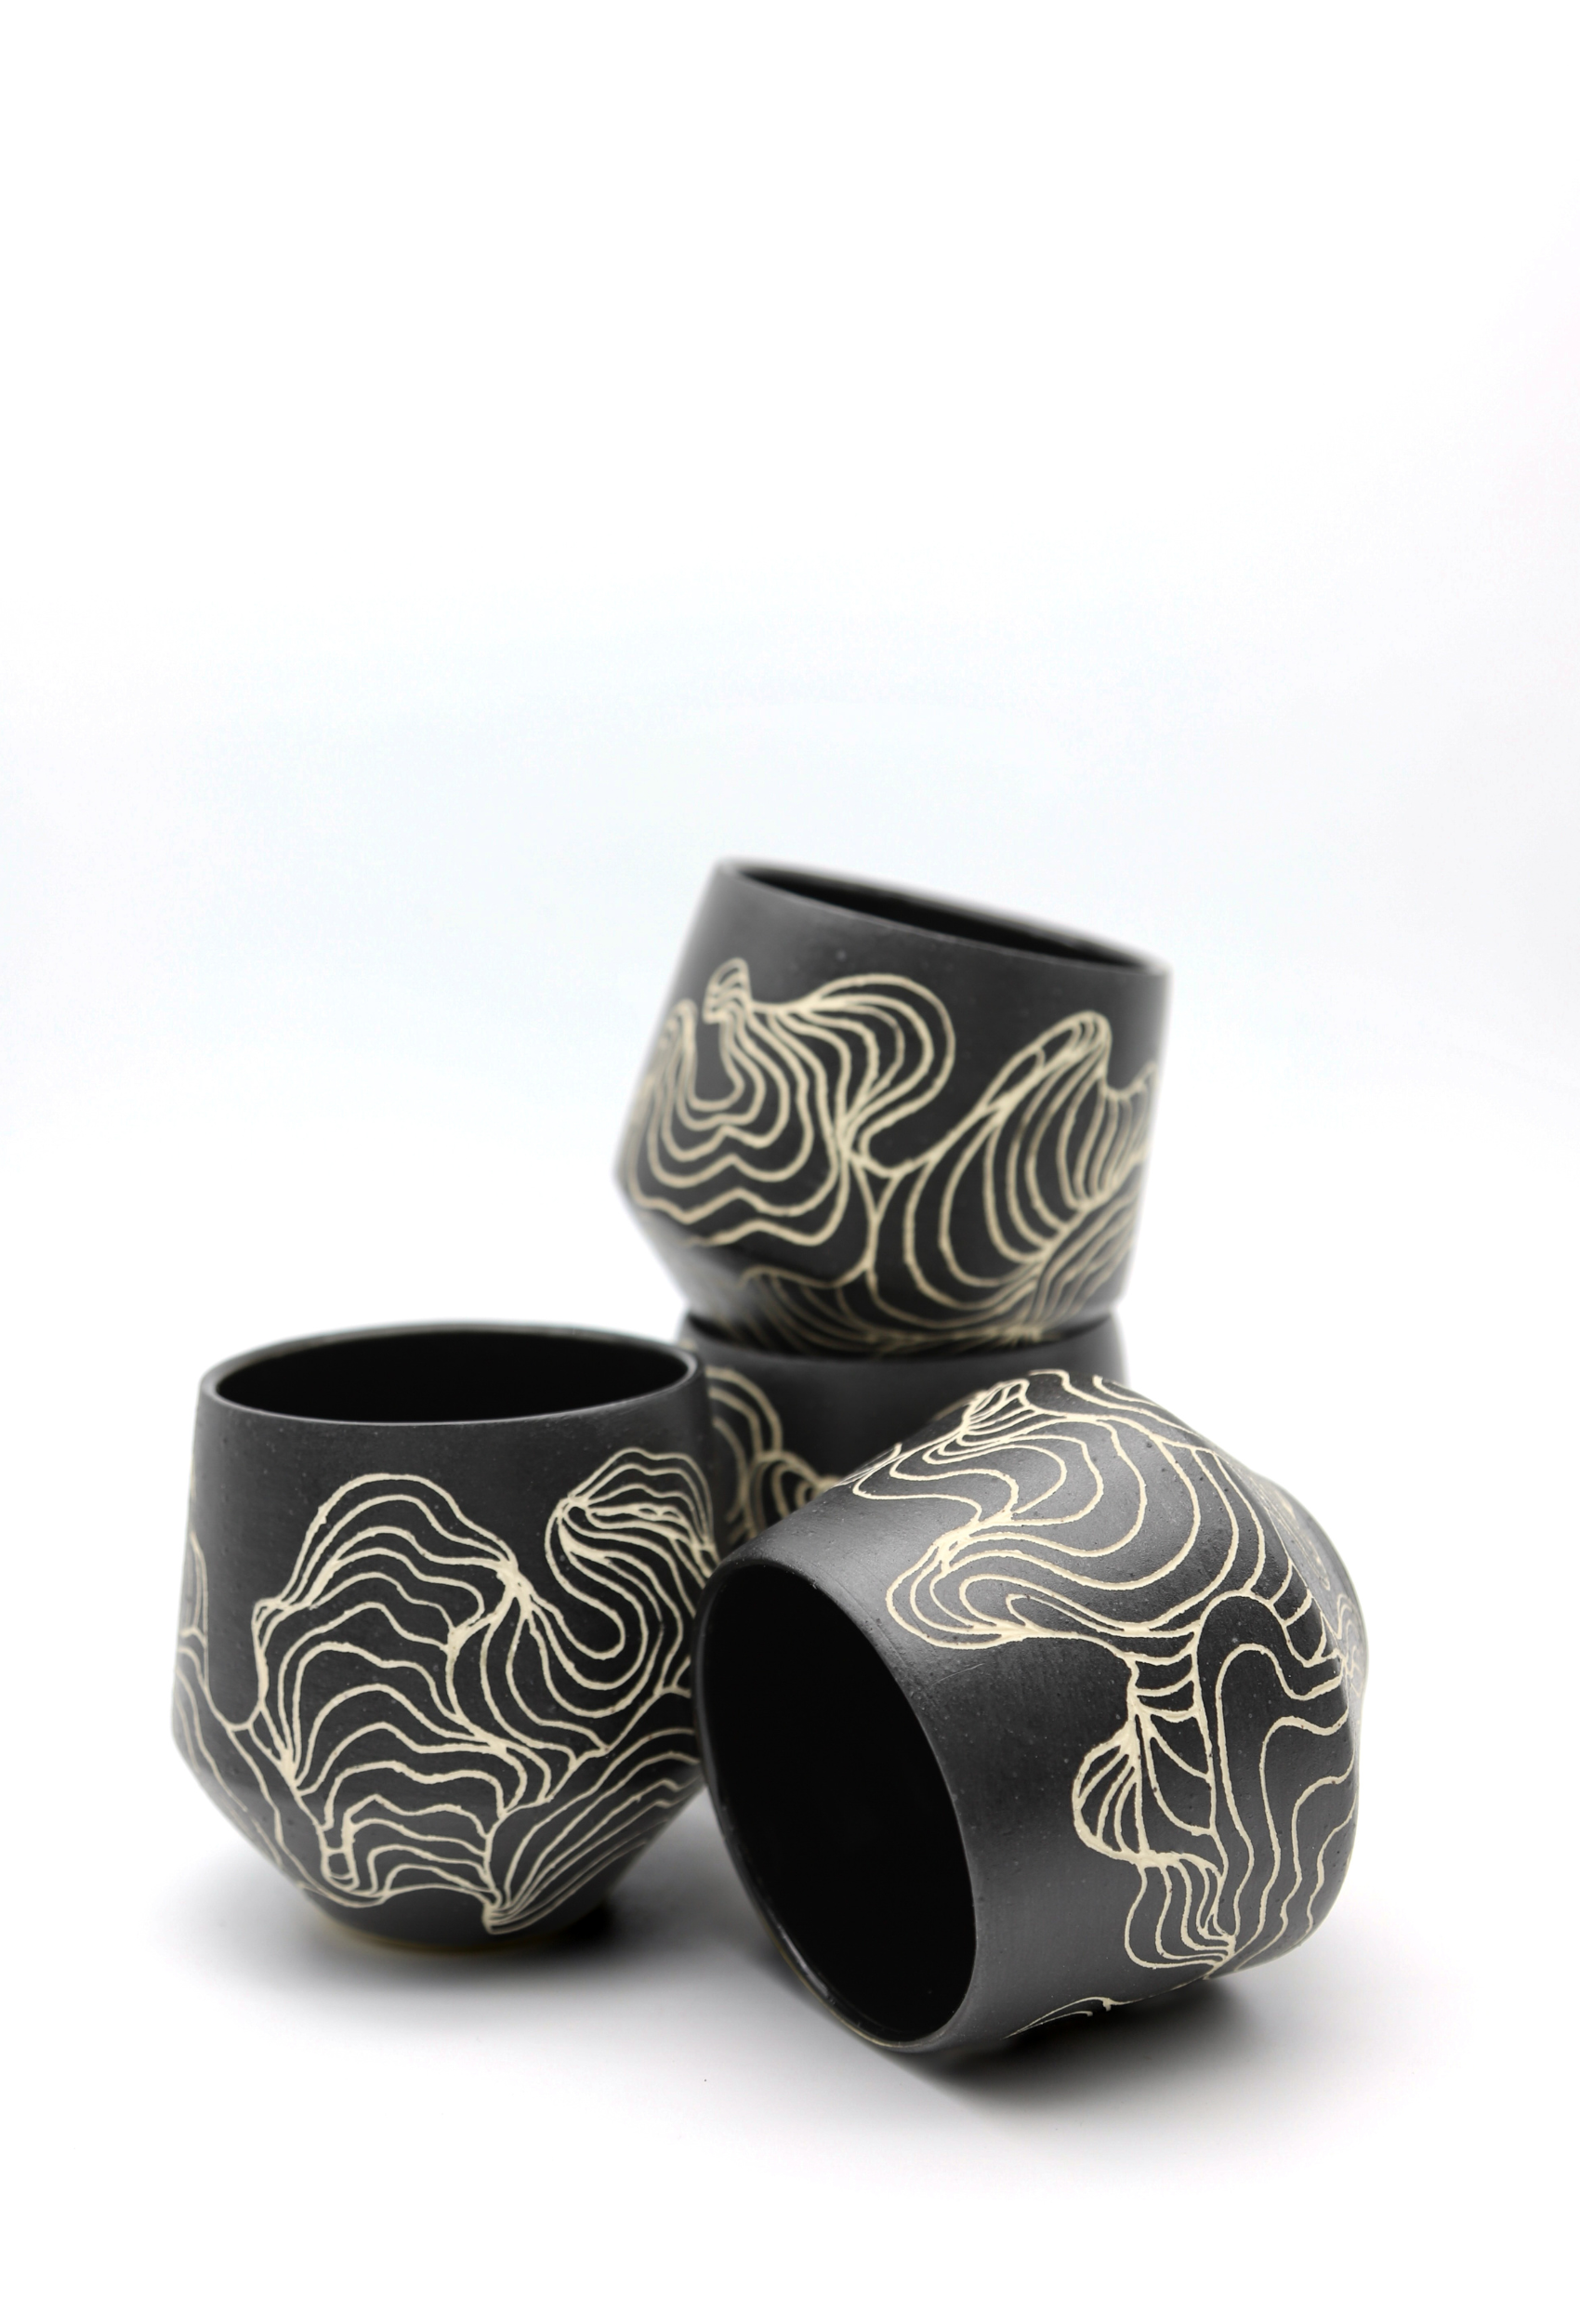 Three black and white cups